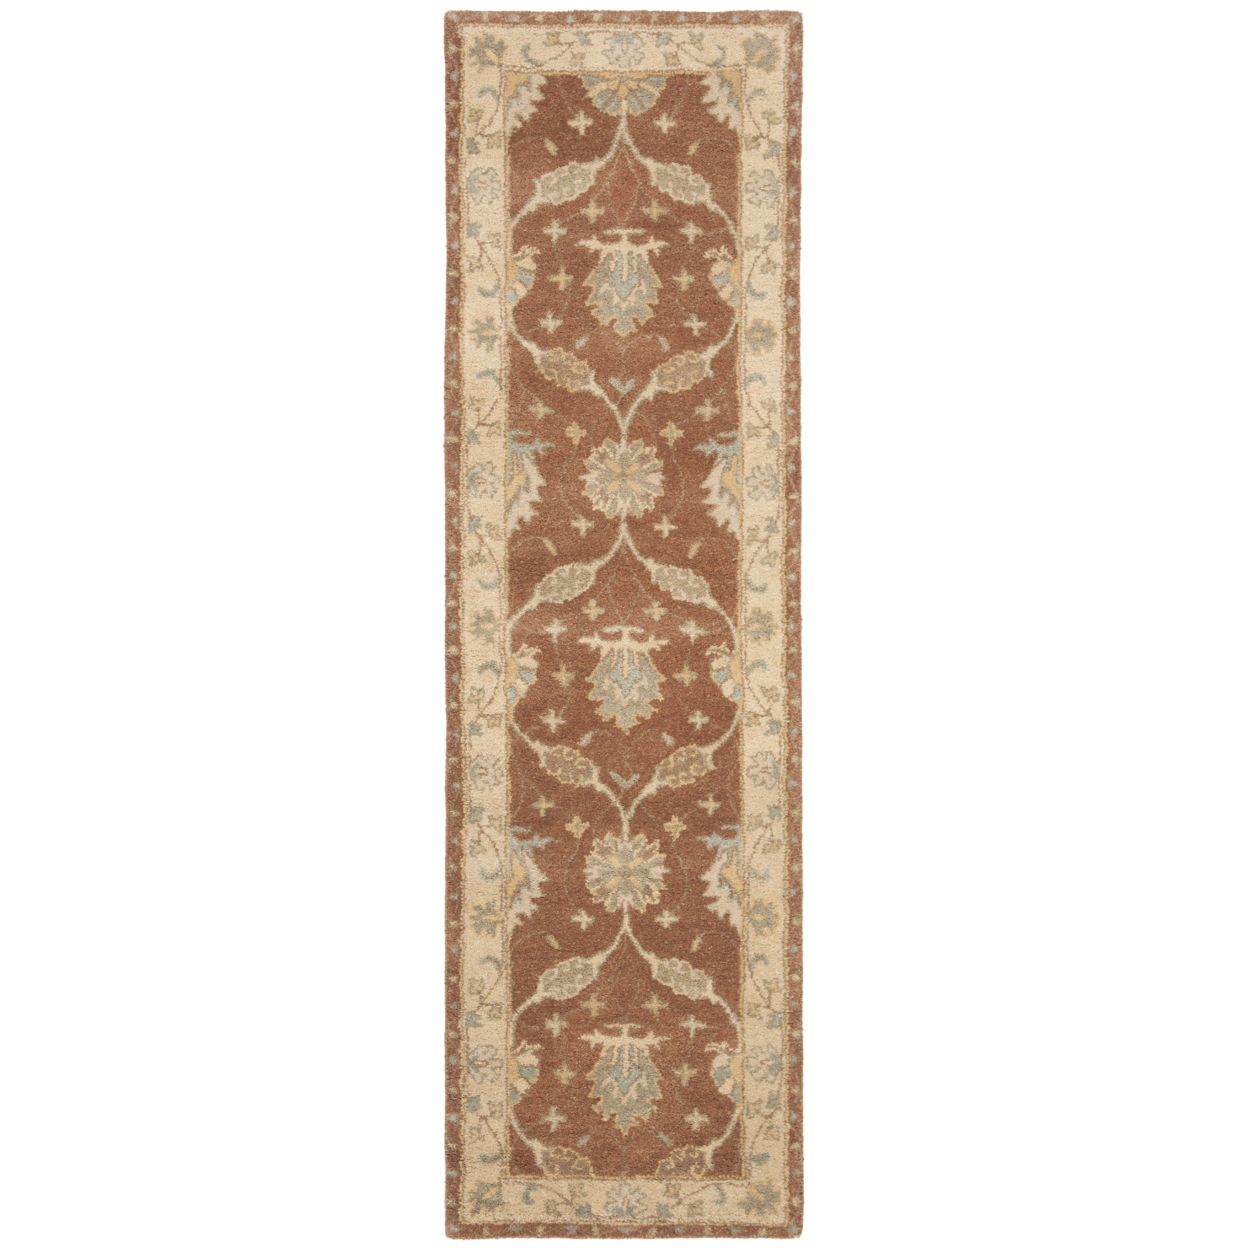 SAFAVIEH Antiquity AT315A Handmade Brown / Taupe Rug - 2' 3 X 4'